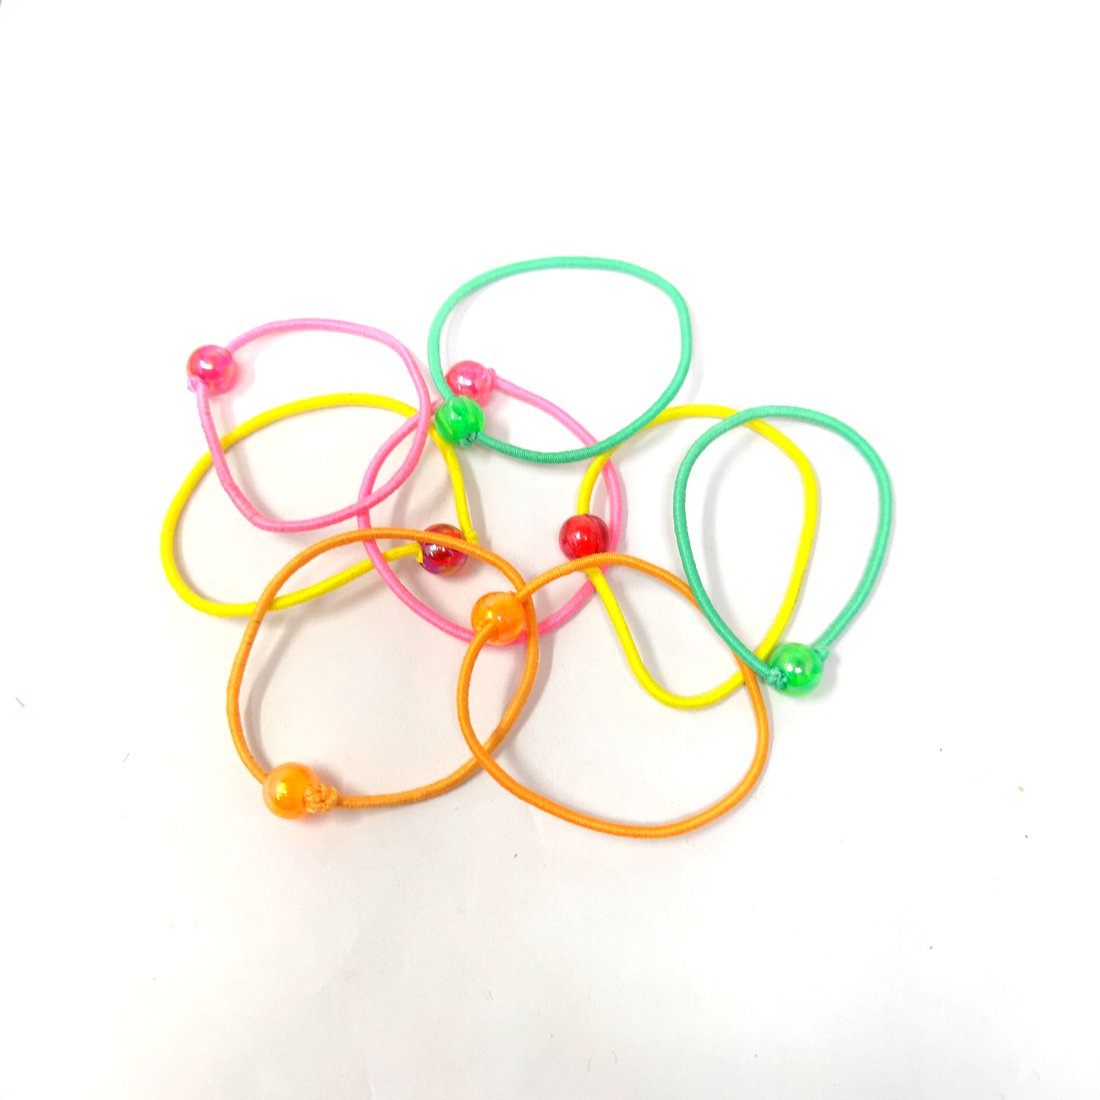 Anokhi Ada small size Elastic Rubber with Multi-Colour Beads for Girls and Women (15-26 Ponytail Holders, 8 Pcs Assorted Colour Rubber)